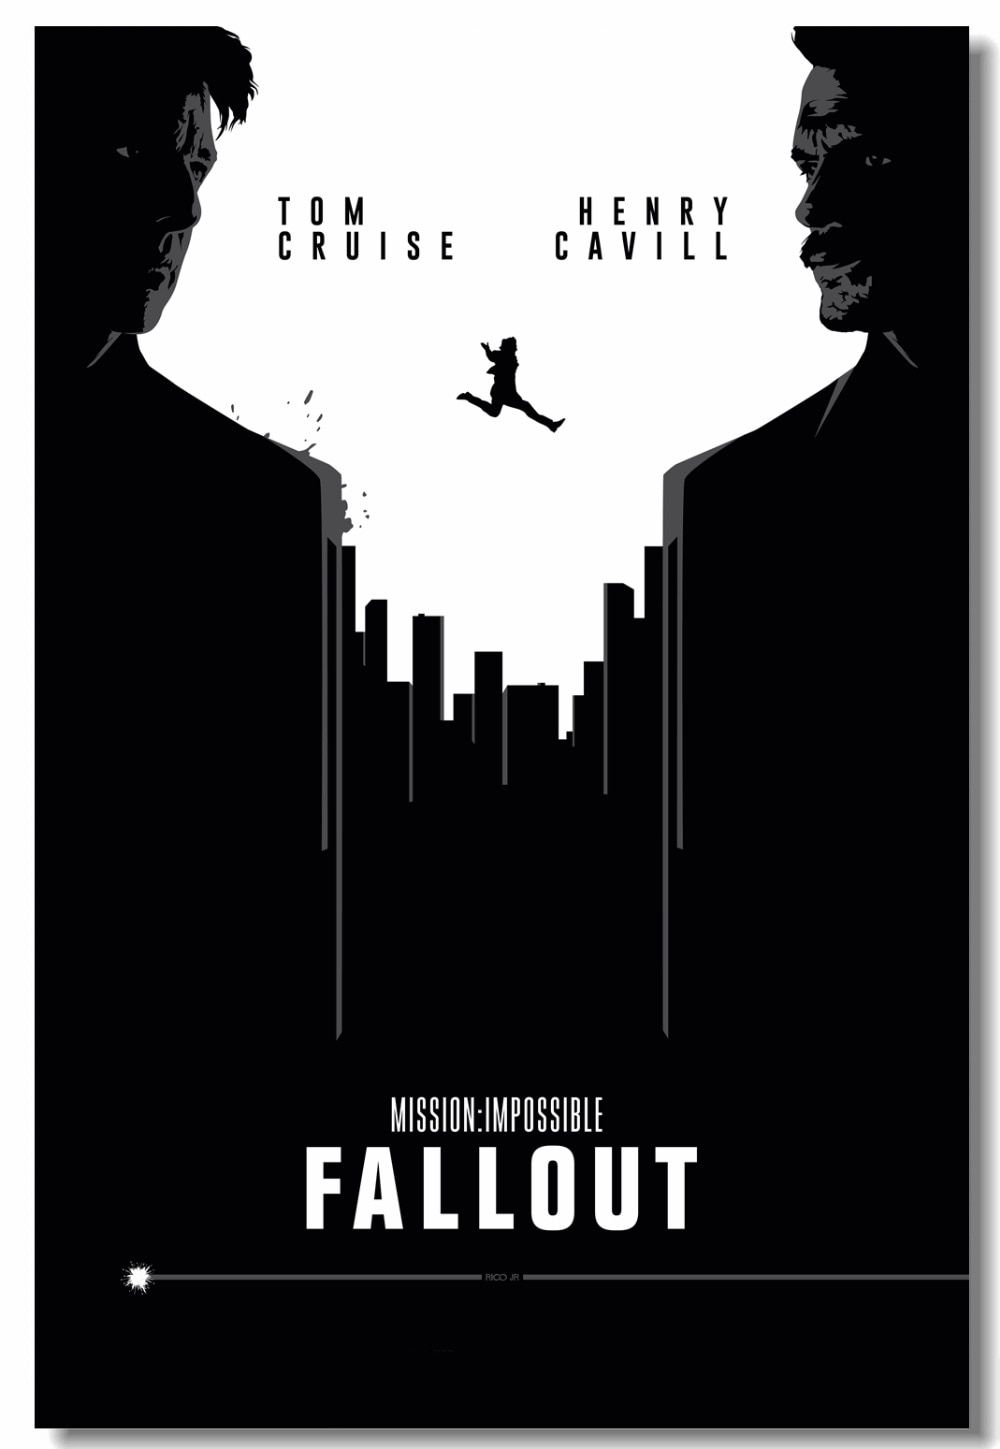 Custom Canvas Wall Decoration Art Mission Impossible Poster Mission Impossible Fallout Wall Stickers Tom Cruise Wallpaper #. Wall Stickers